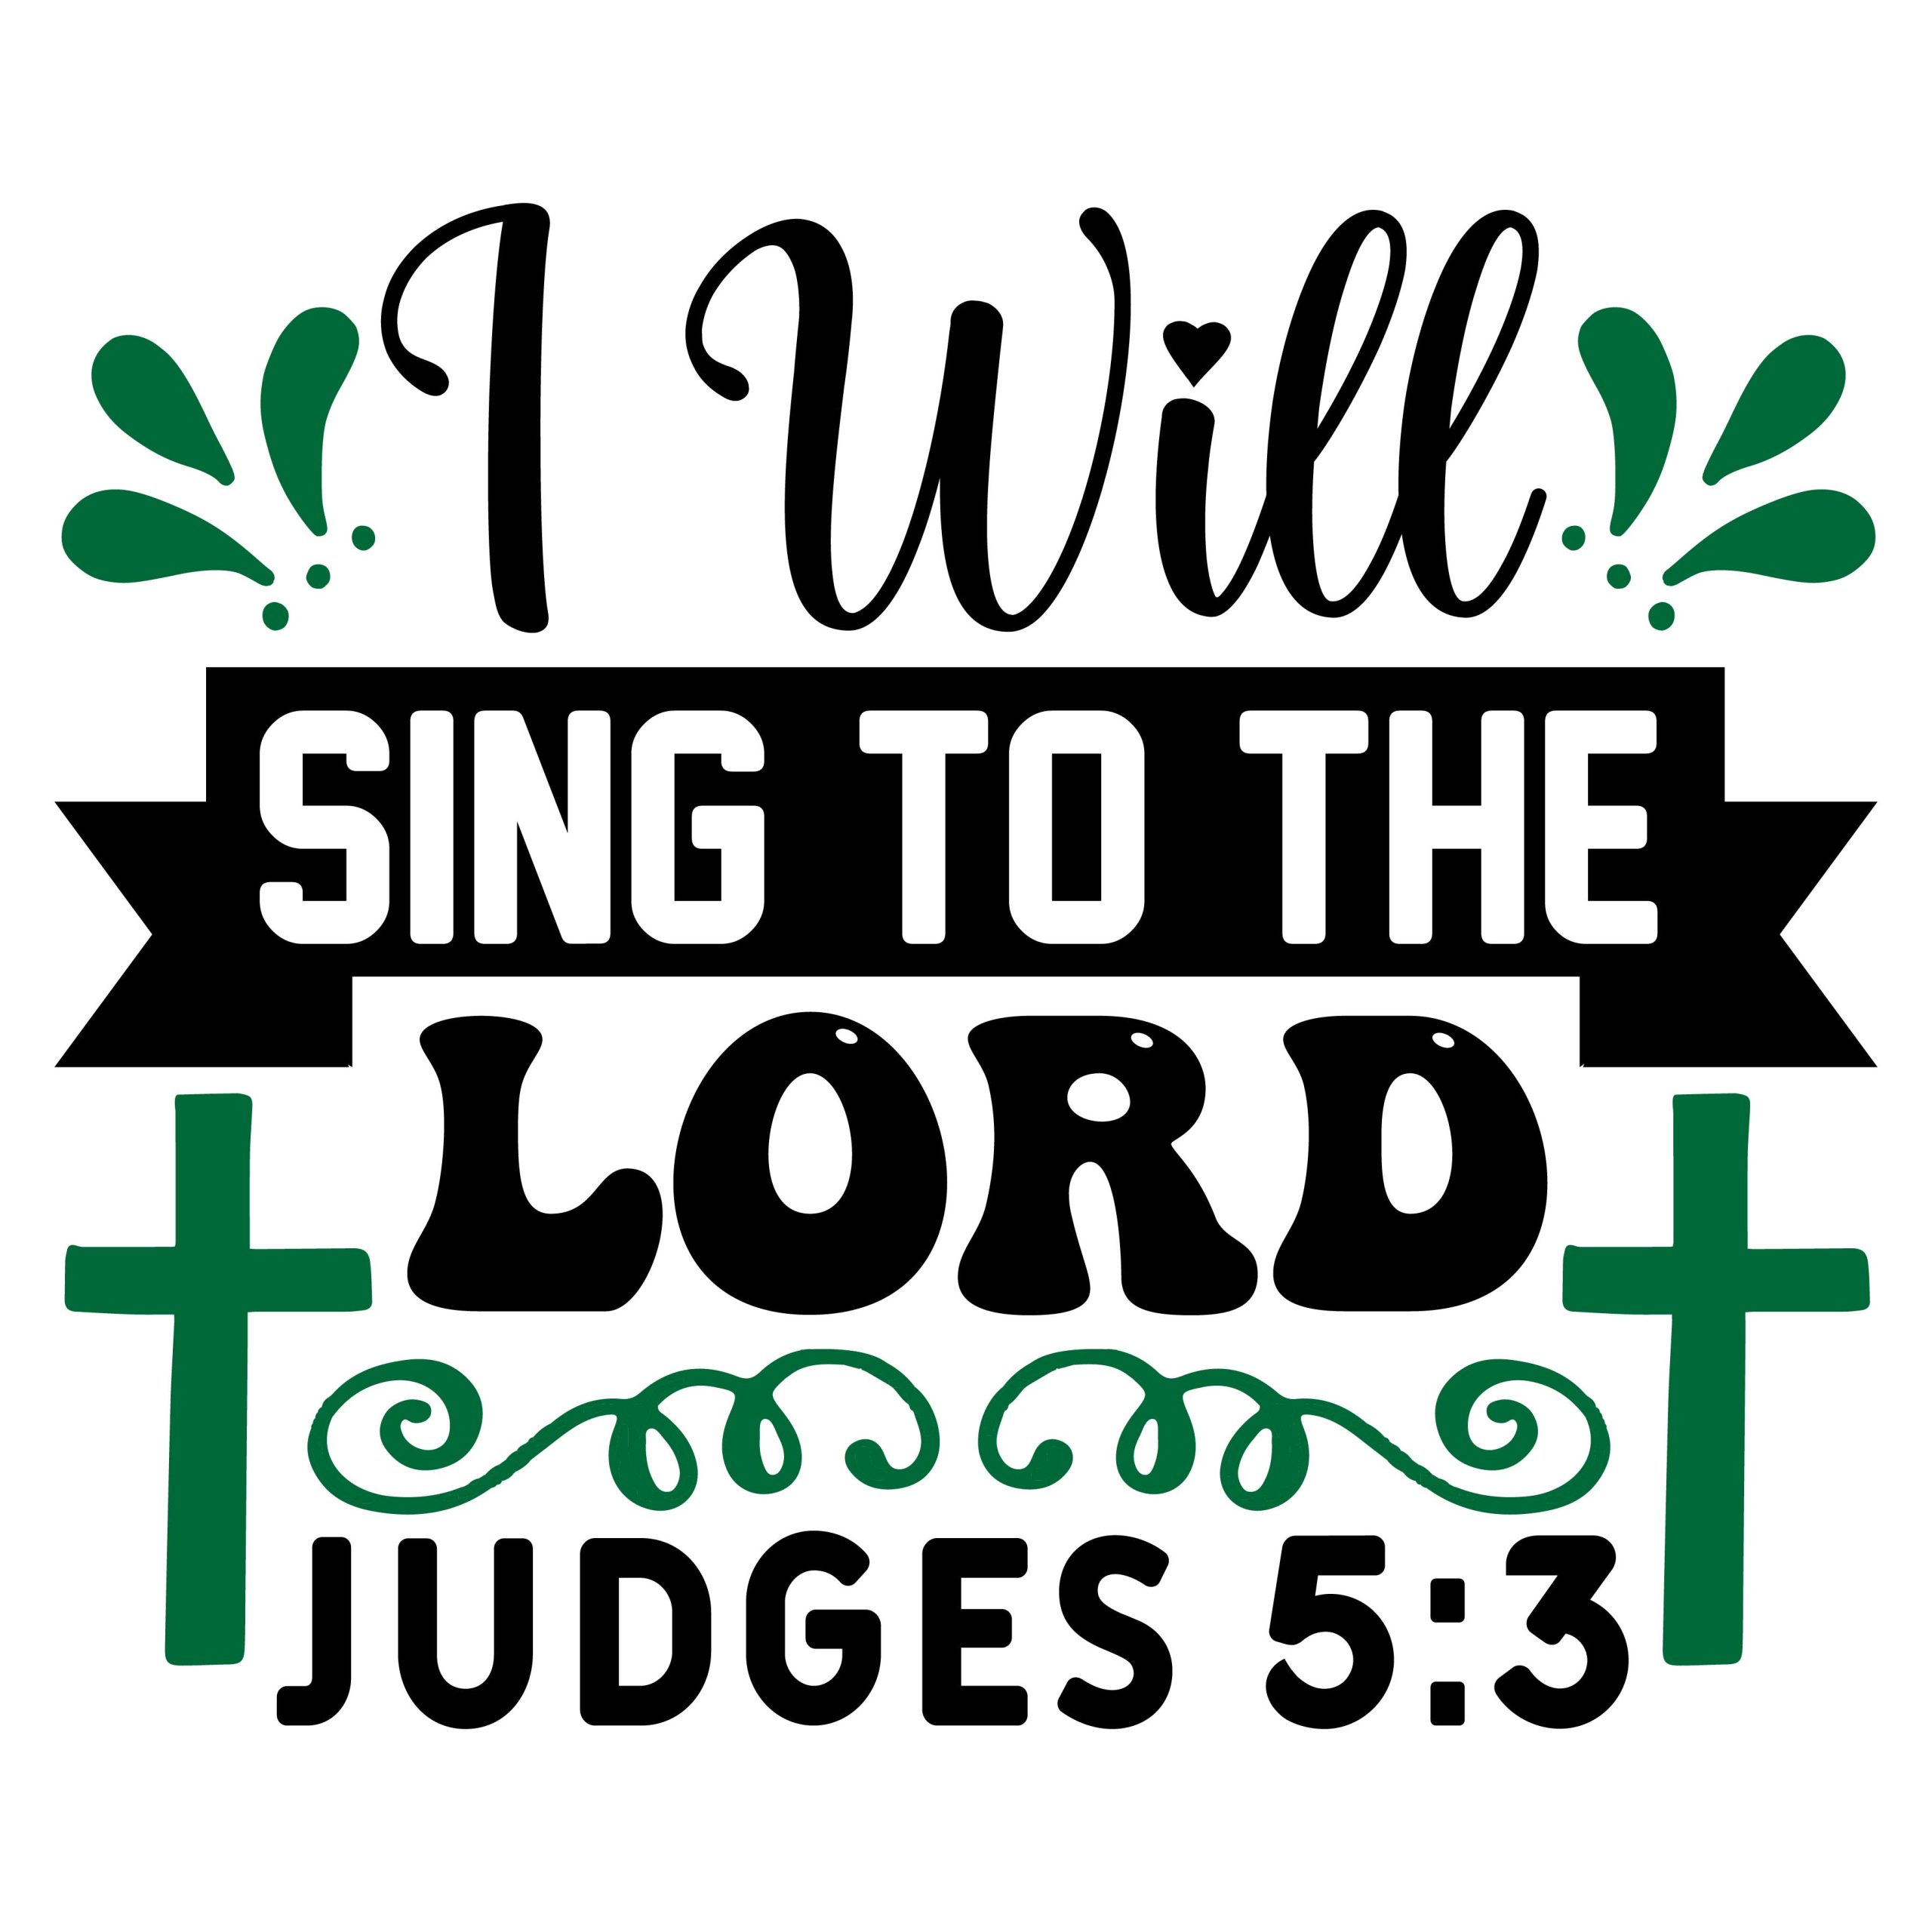 I will sing to the lord Judges 5:3, bible verses, scripture verses, svg files, passages, sayings, cricut designs, silhouette, embroidery, bundle, free cut files, design space, vector